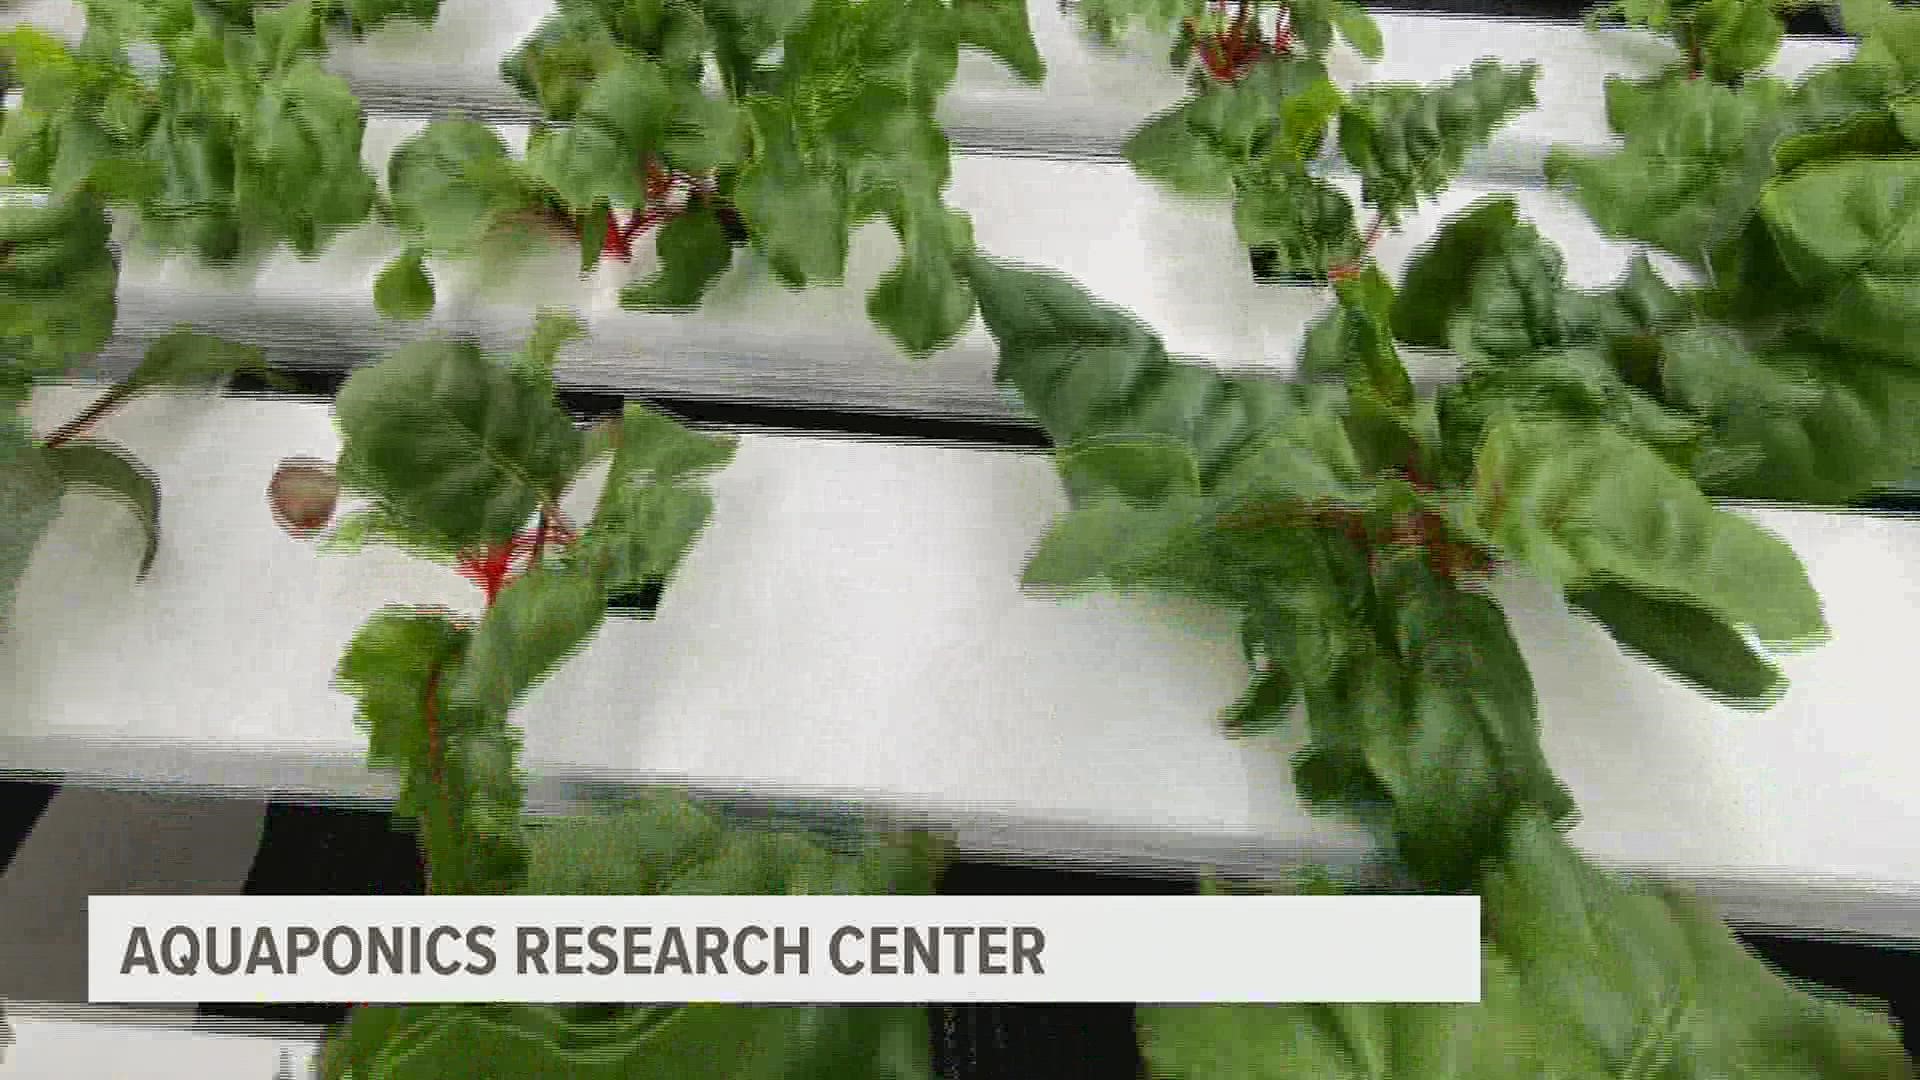 A donation made on Giving Tuesday by The GIANT Company is allowing for expansion of Harrisburg University's hydroponics and aquaponics programs.